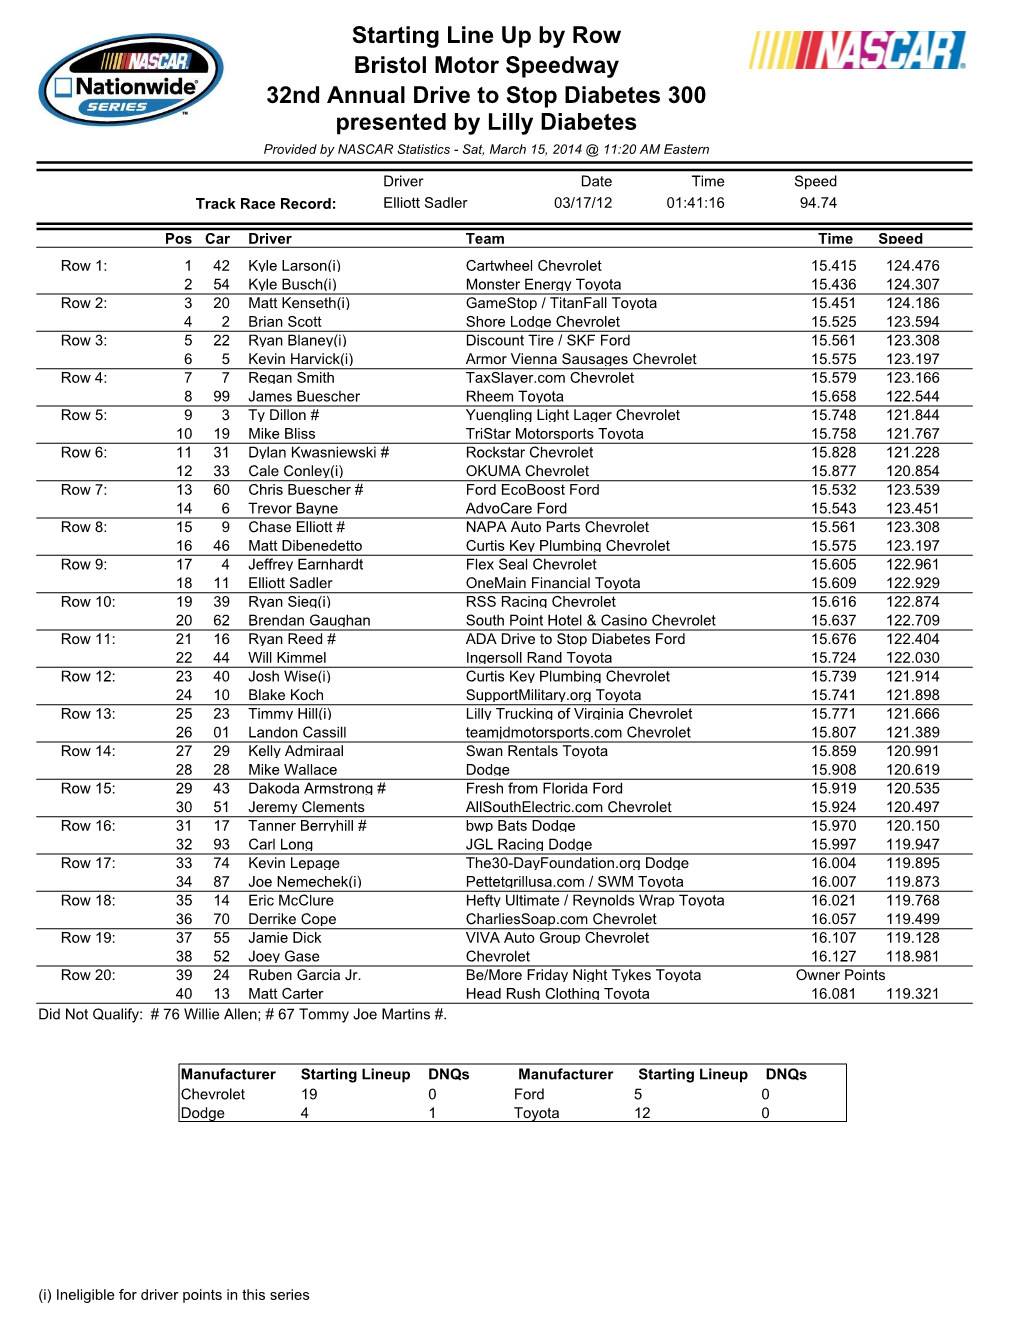 Lineup Dnqs Manufacturer Starting Lineup Dnqs Chevrolet 19 0 Ford 5 0 Dodge 4 1 Toyota 12 0